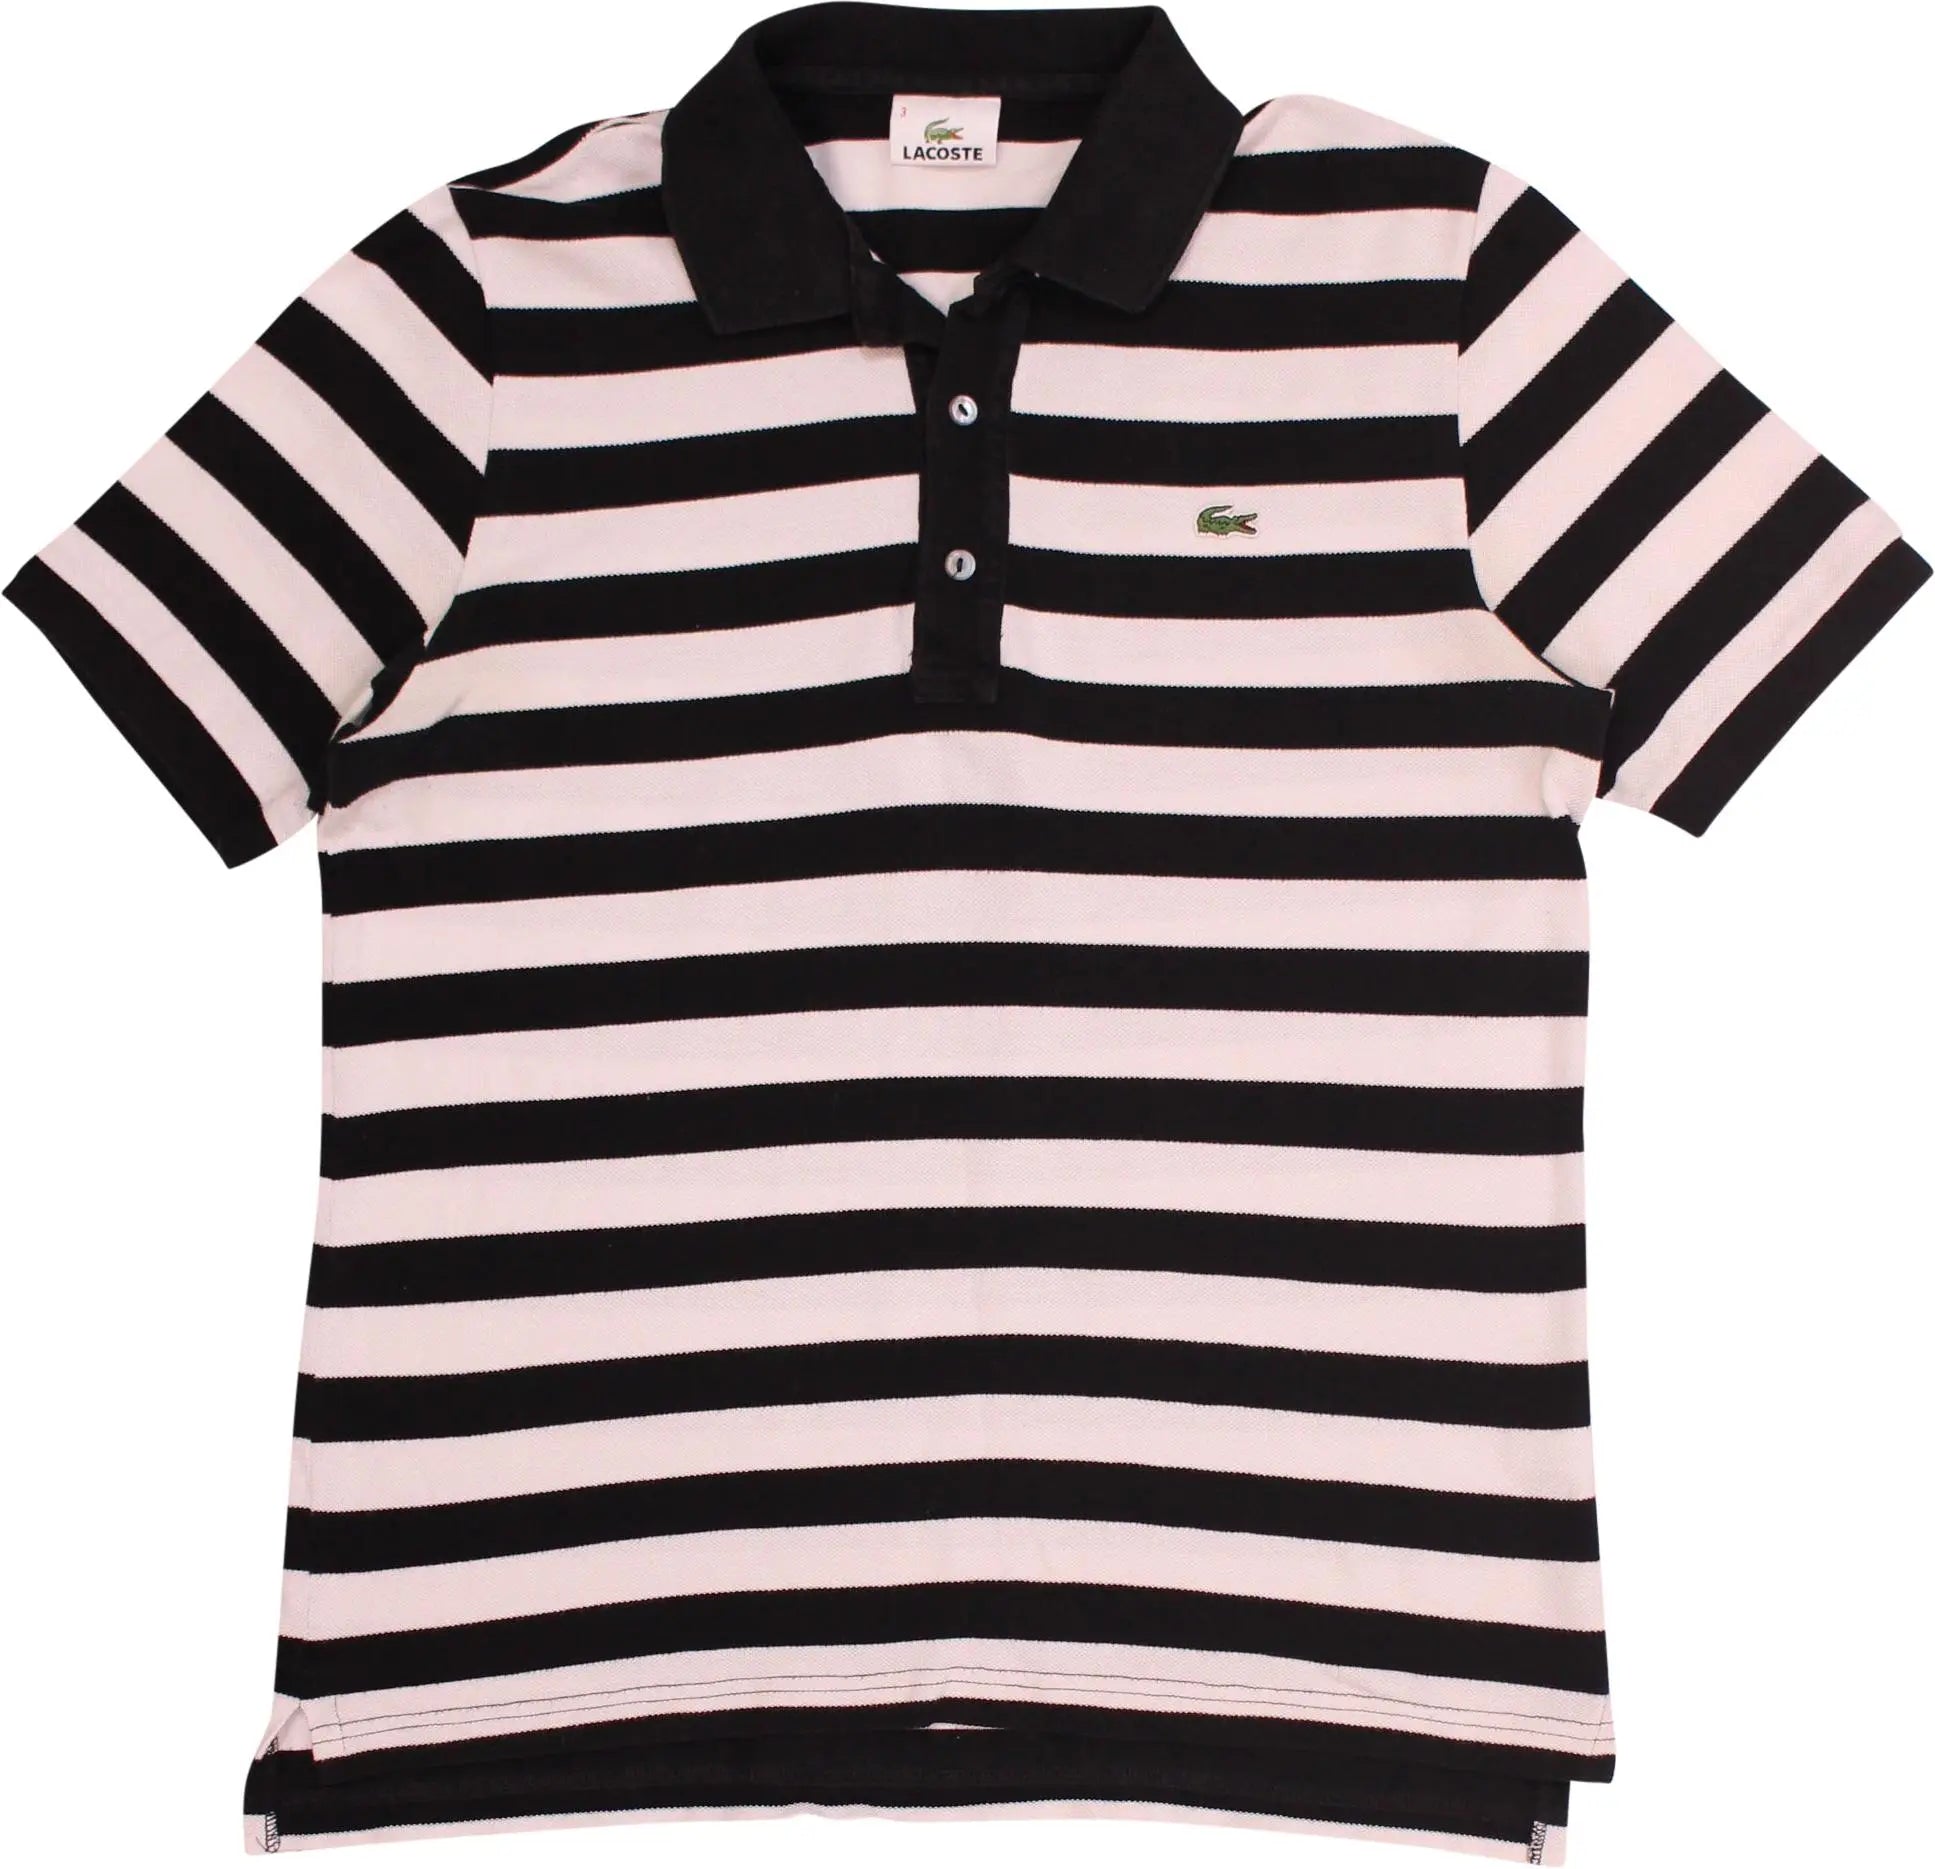 Lacoste - Black Striped Polo Shirt by Lacoste- ThriftTale.com - Vintage and second handclothing